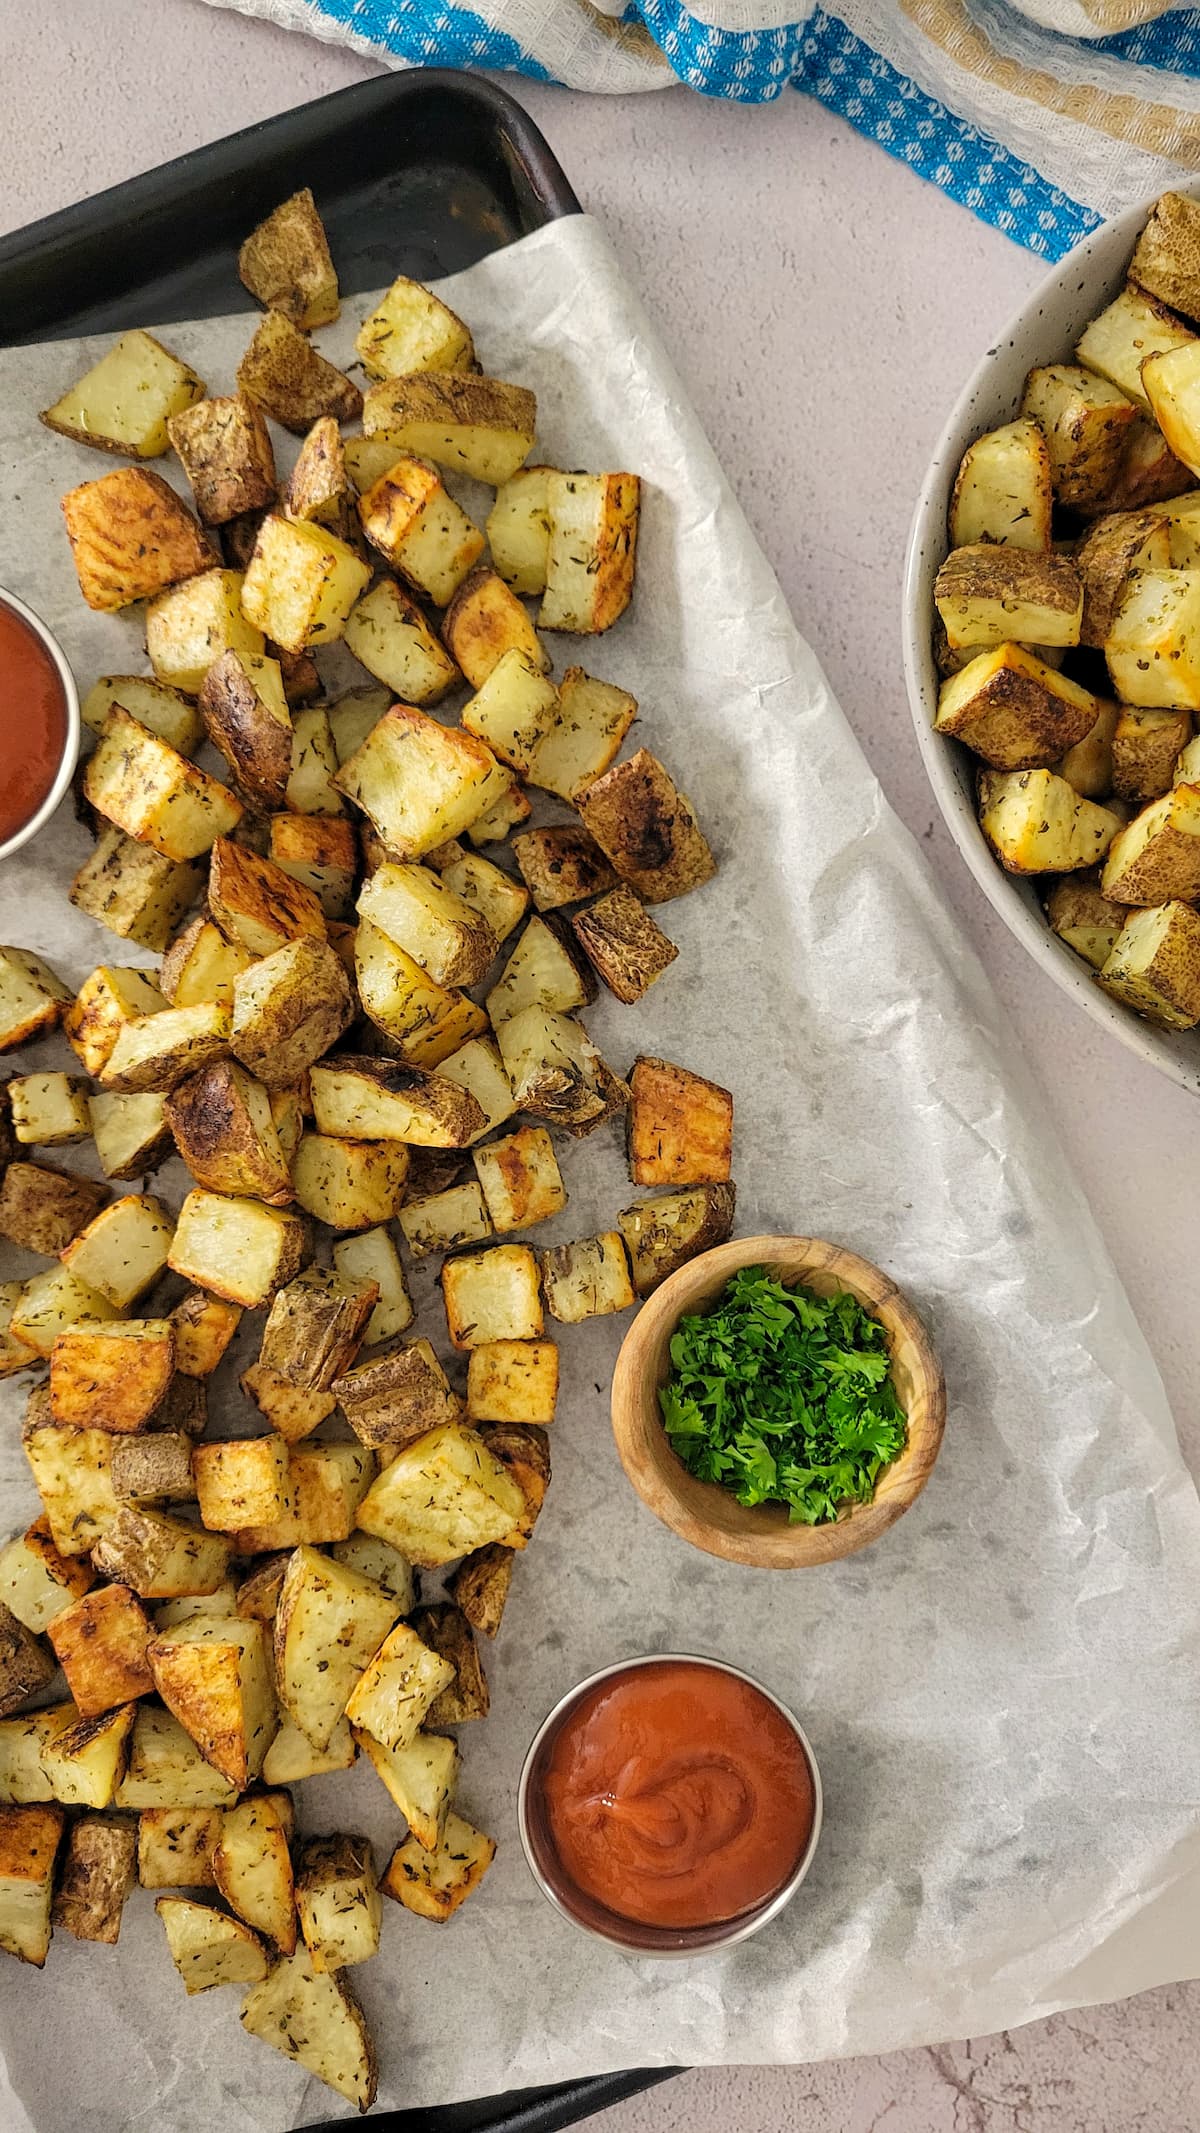 crispy home fries on a parchment lined baking sheet with ramekins of ketchup and parsley, bowl of more potatoes next to it